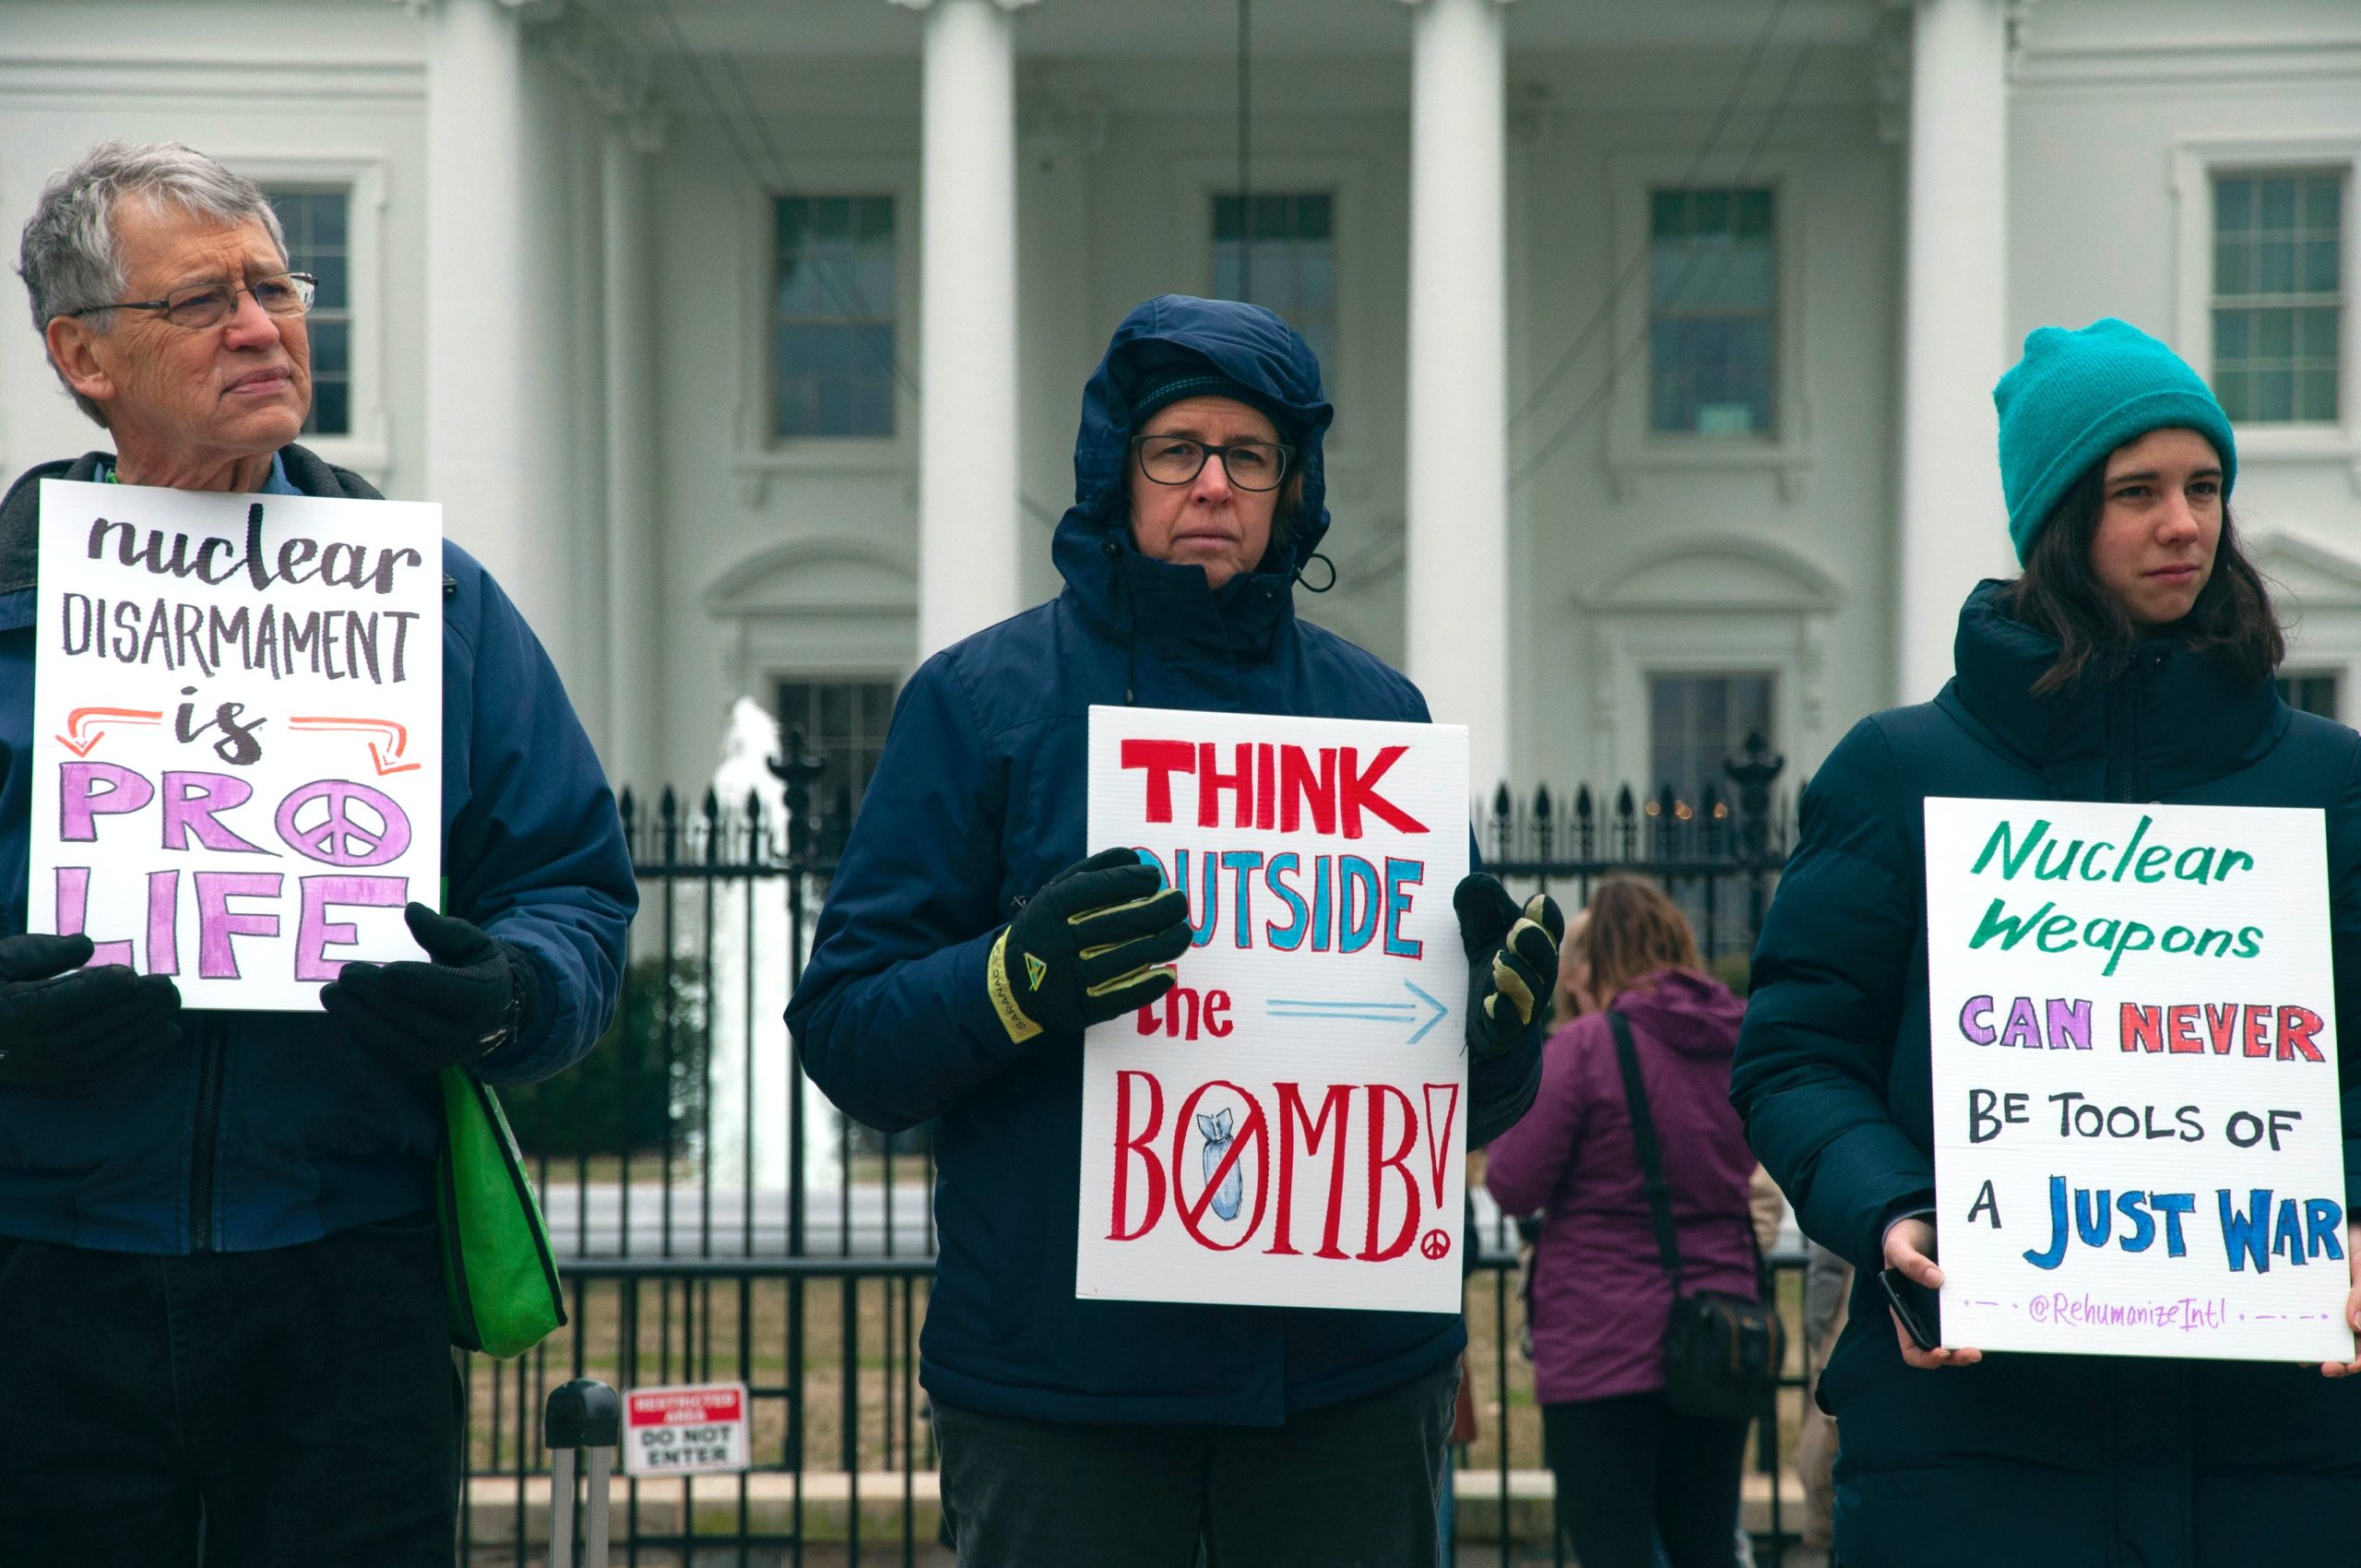 What Christians Must Remember about Nuclear Weapons and Arms Control